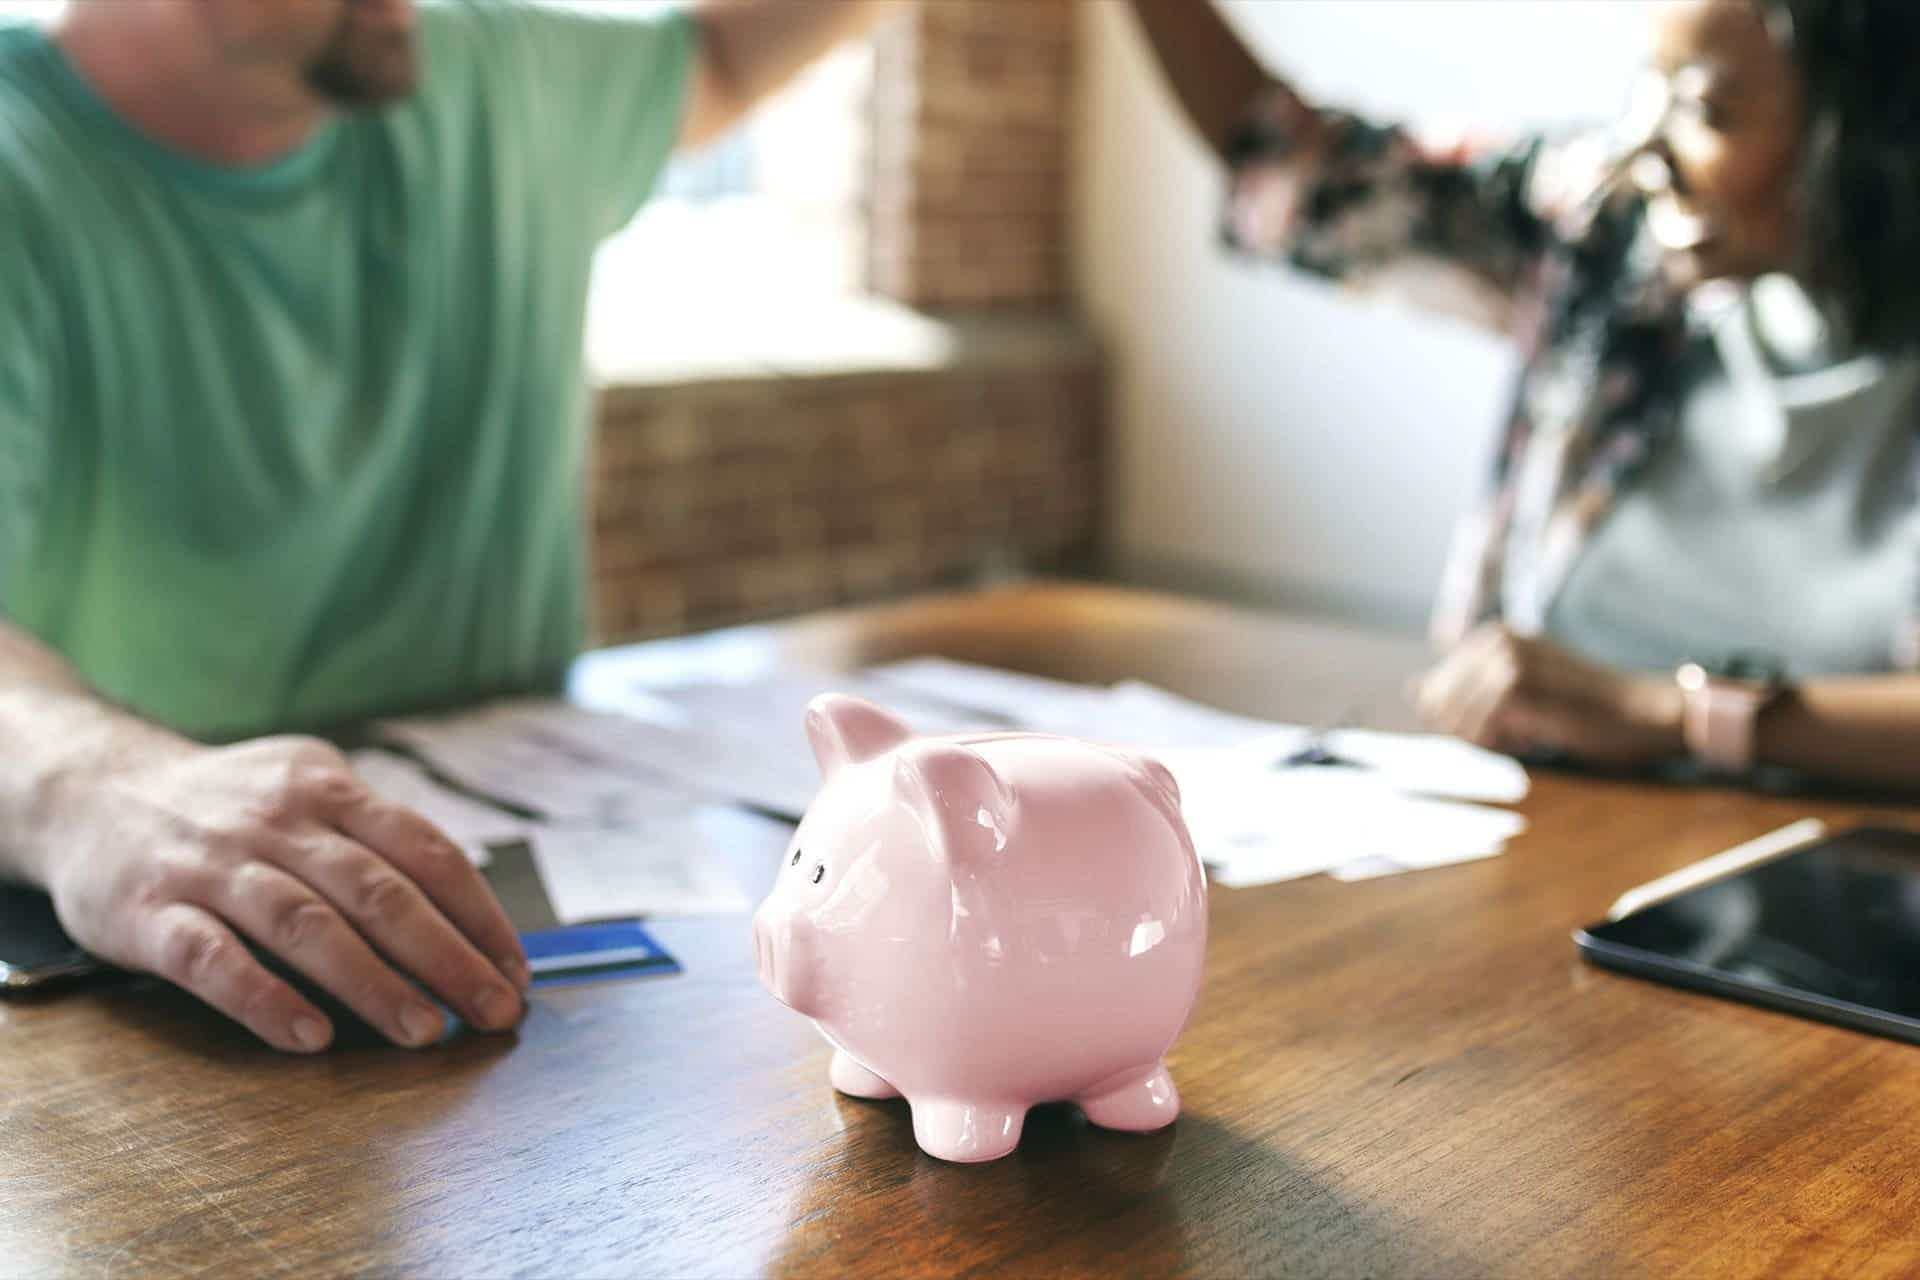 Find out the best tips for start saving money this year